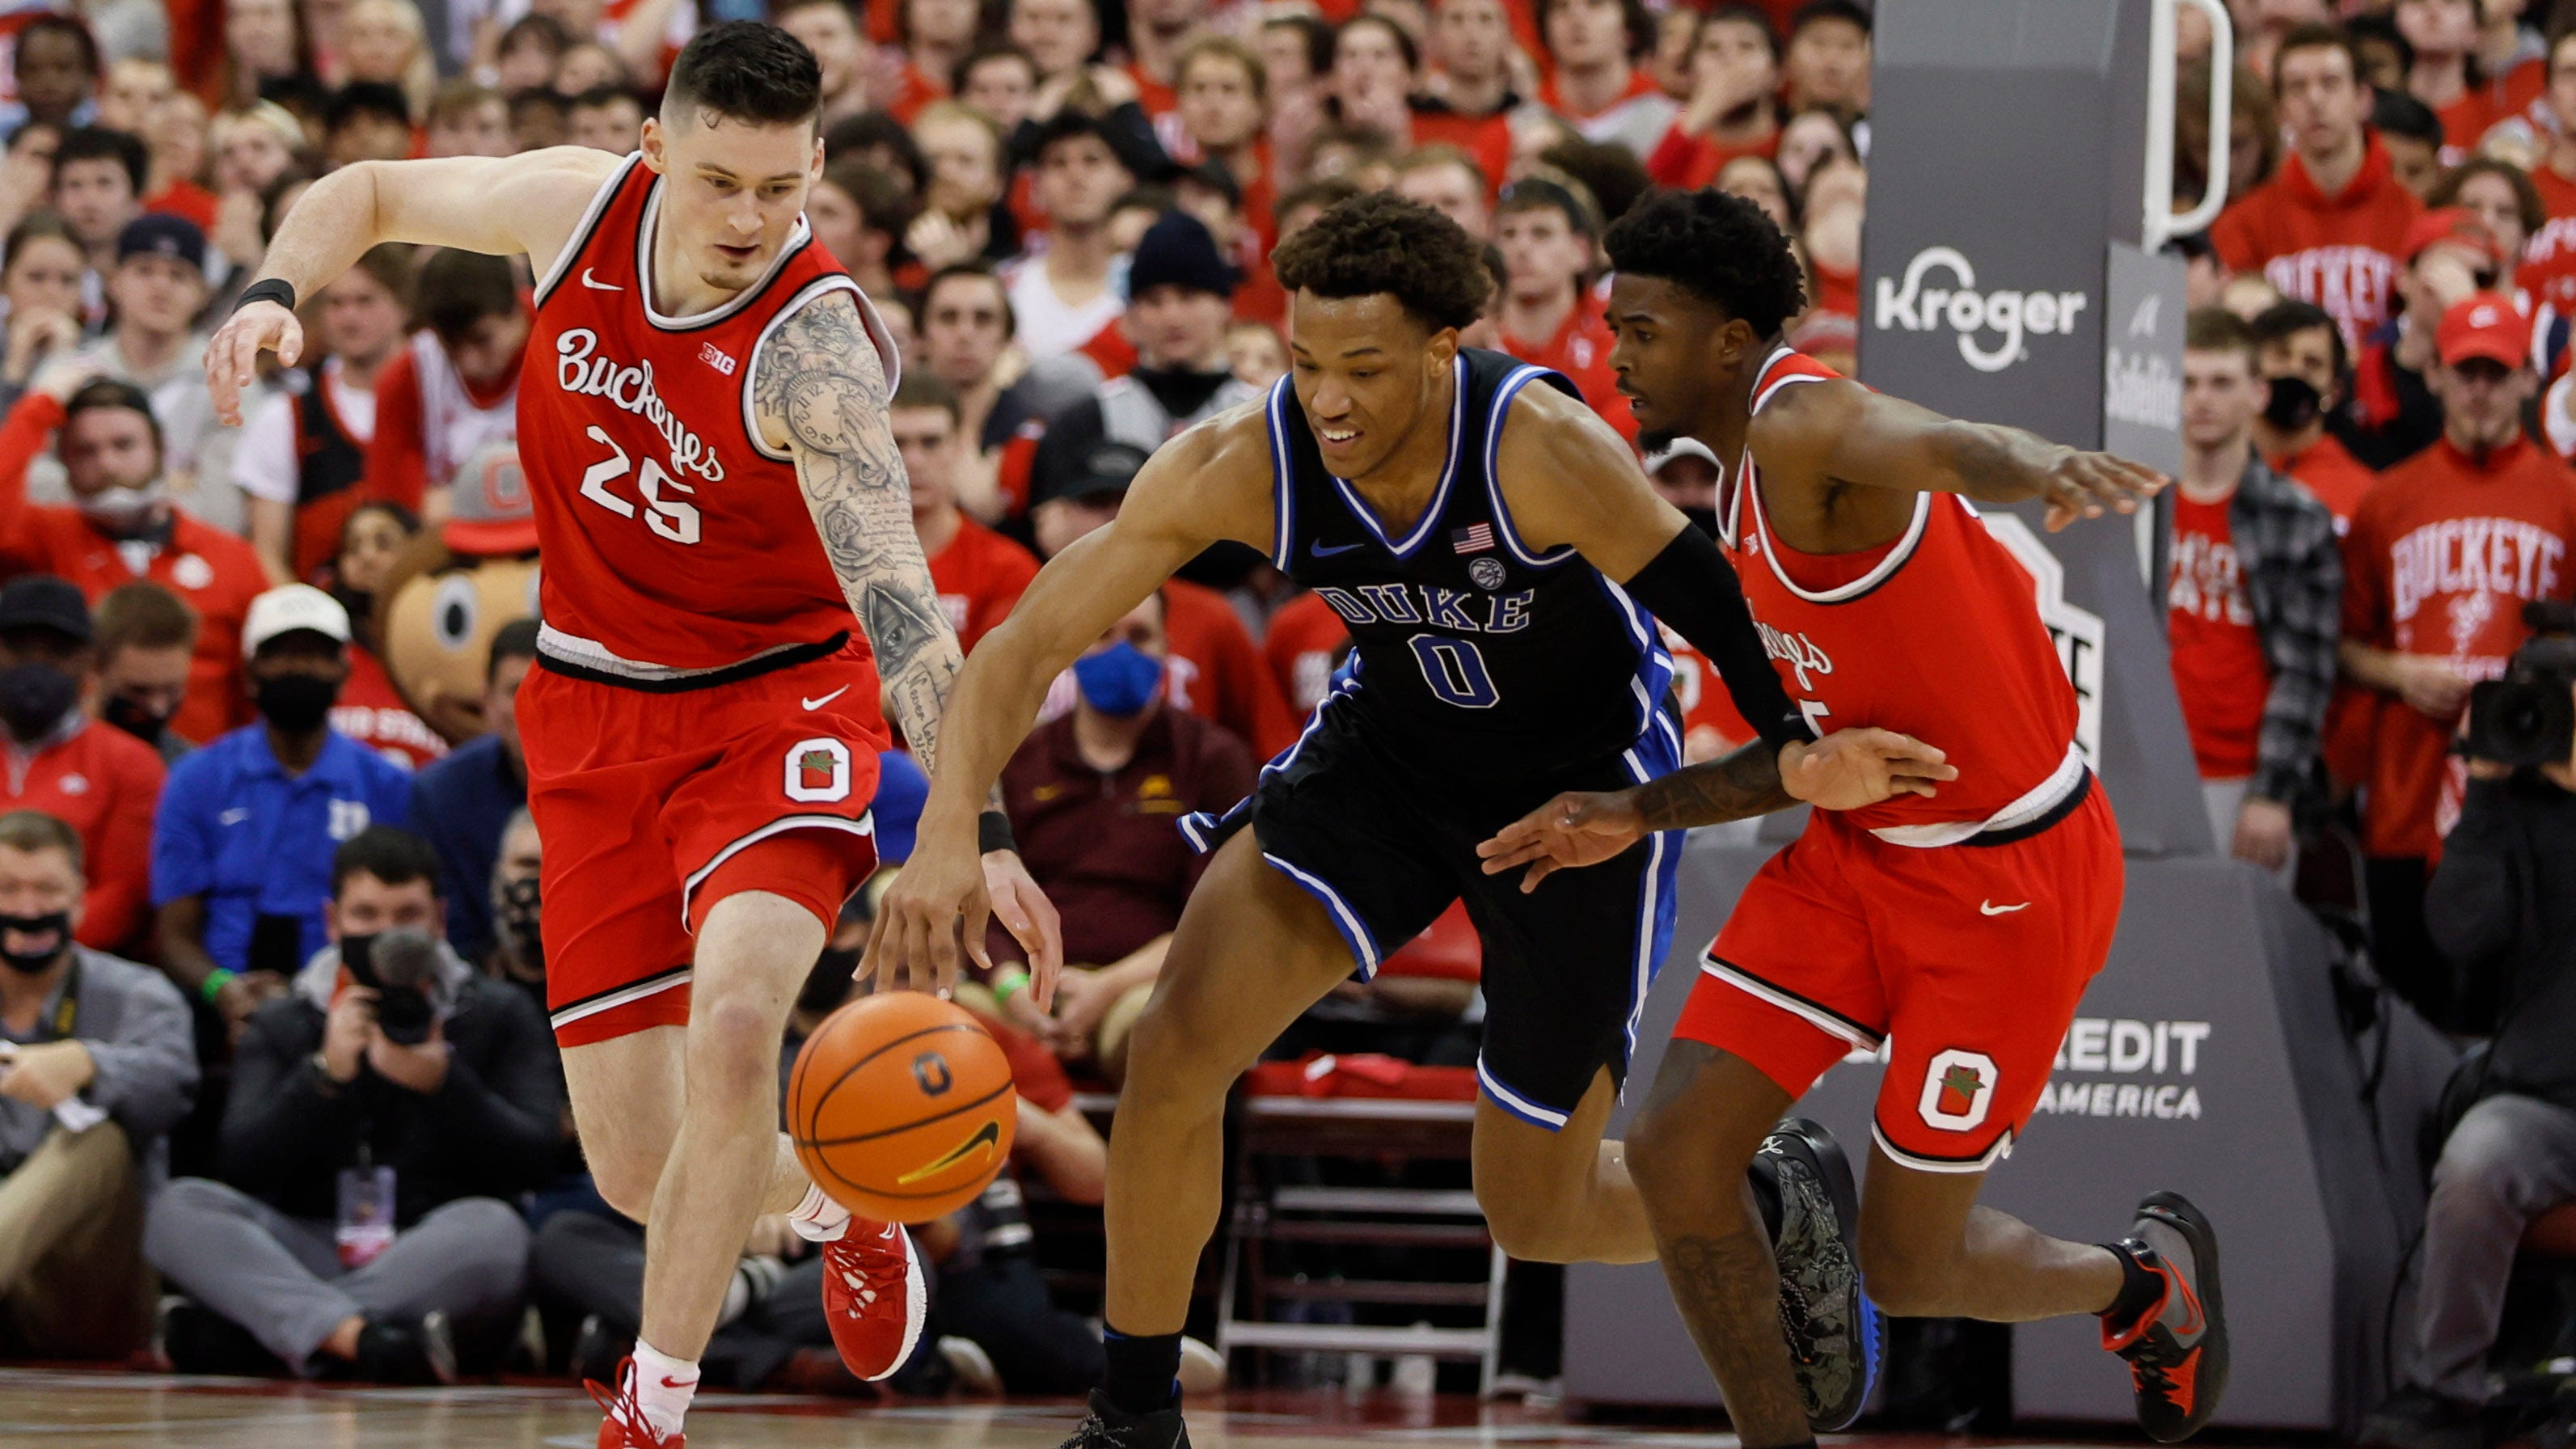 Ohio State ices out No. 1 Duke in final minutes, wins 71-66